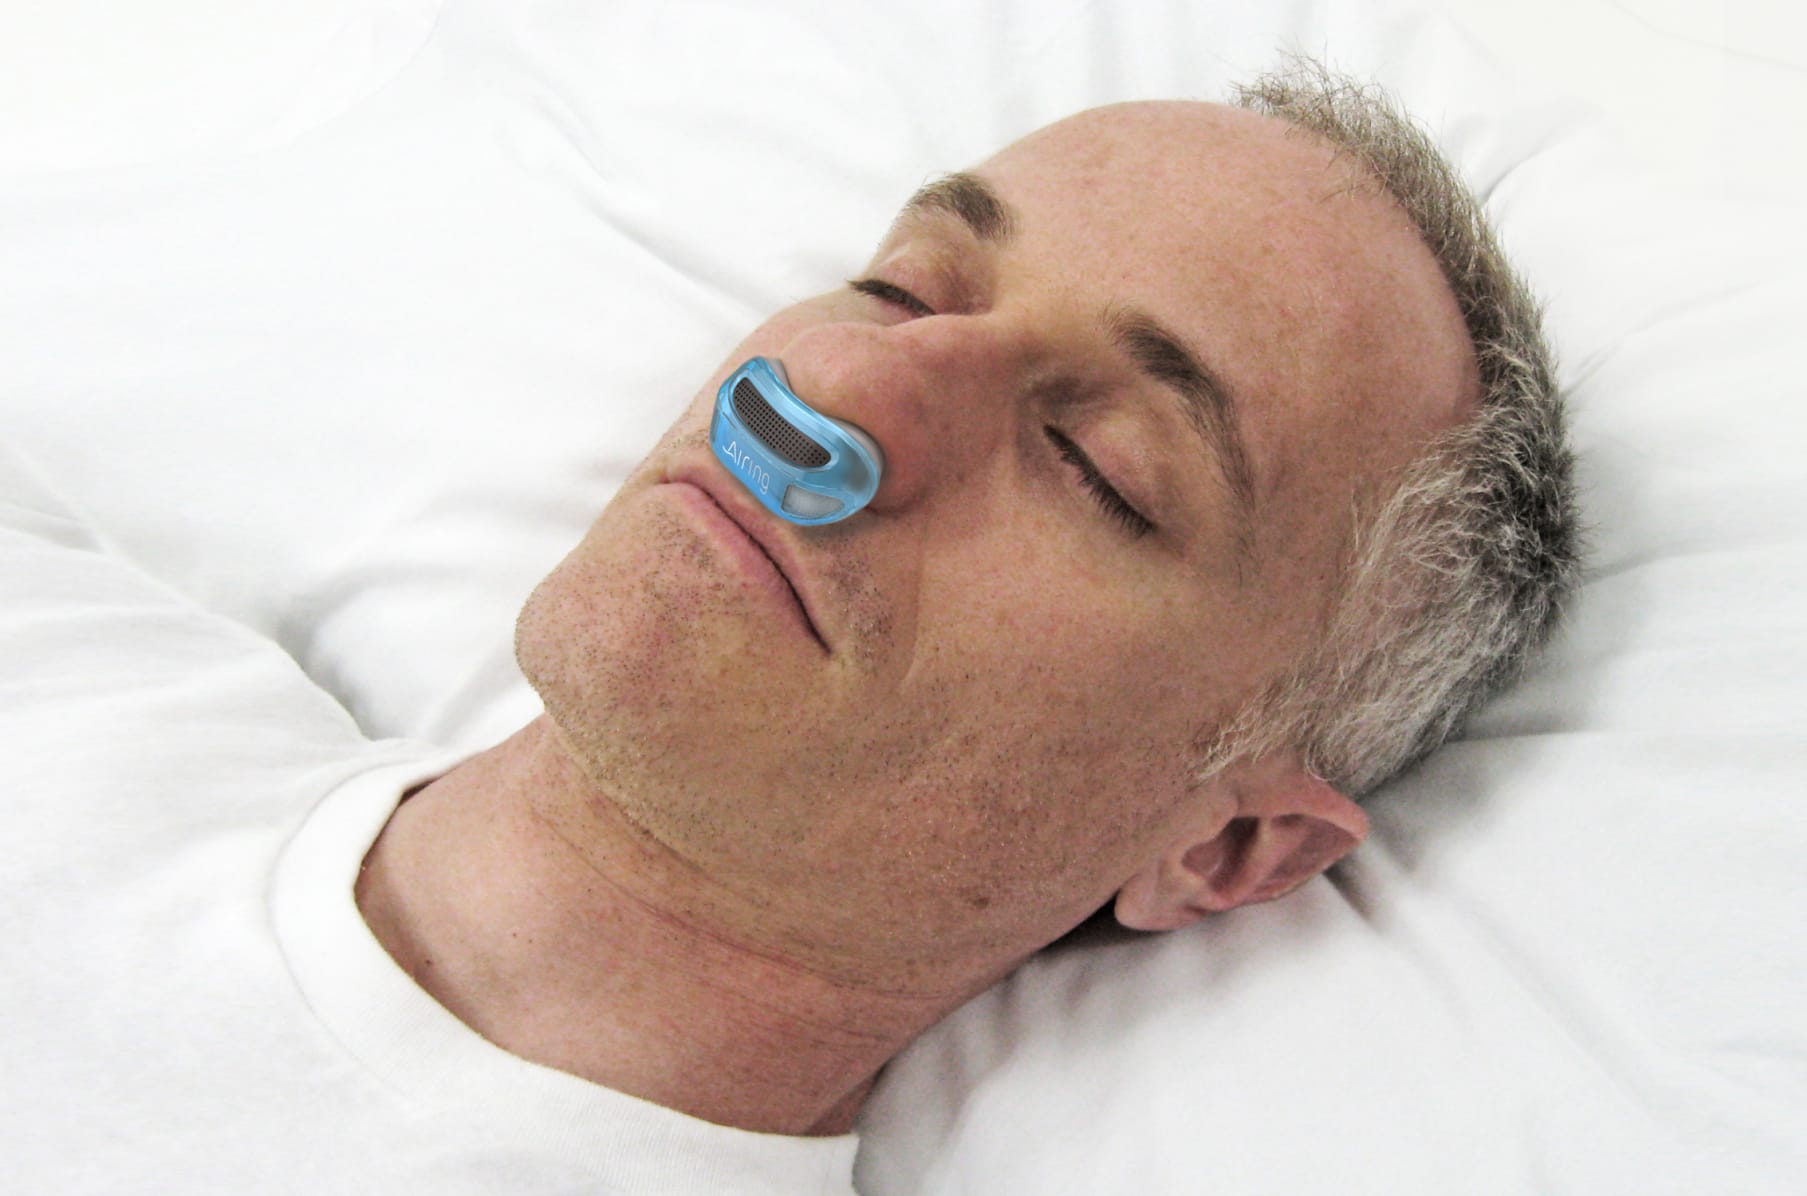 DAILY SUMMIT Anti Snore CPAP - Airing: Hoseless, Maskless, Micro-CPAP –  Daily Summit